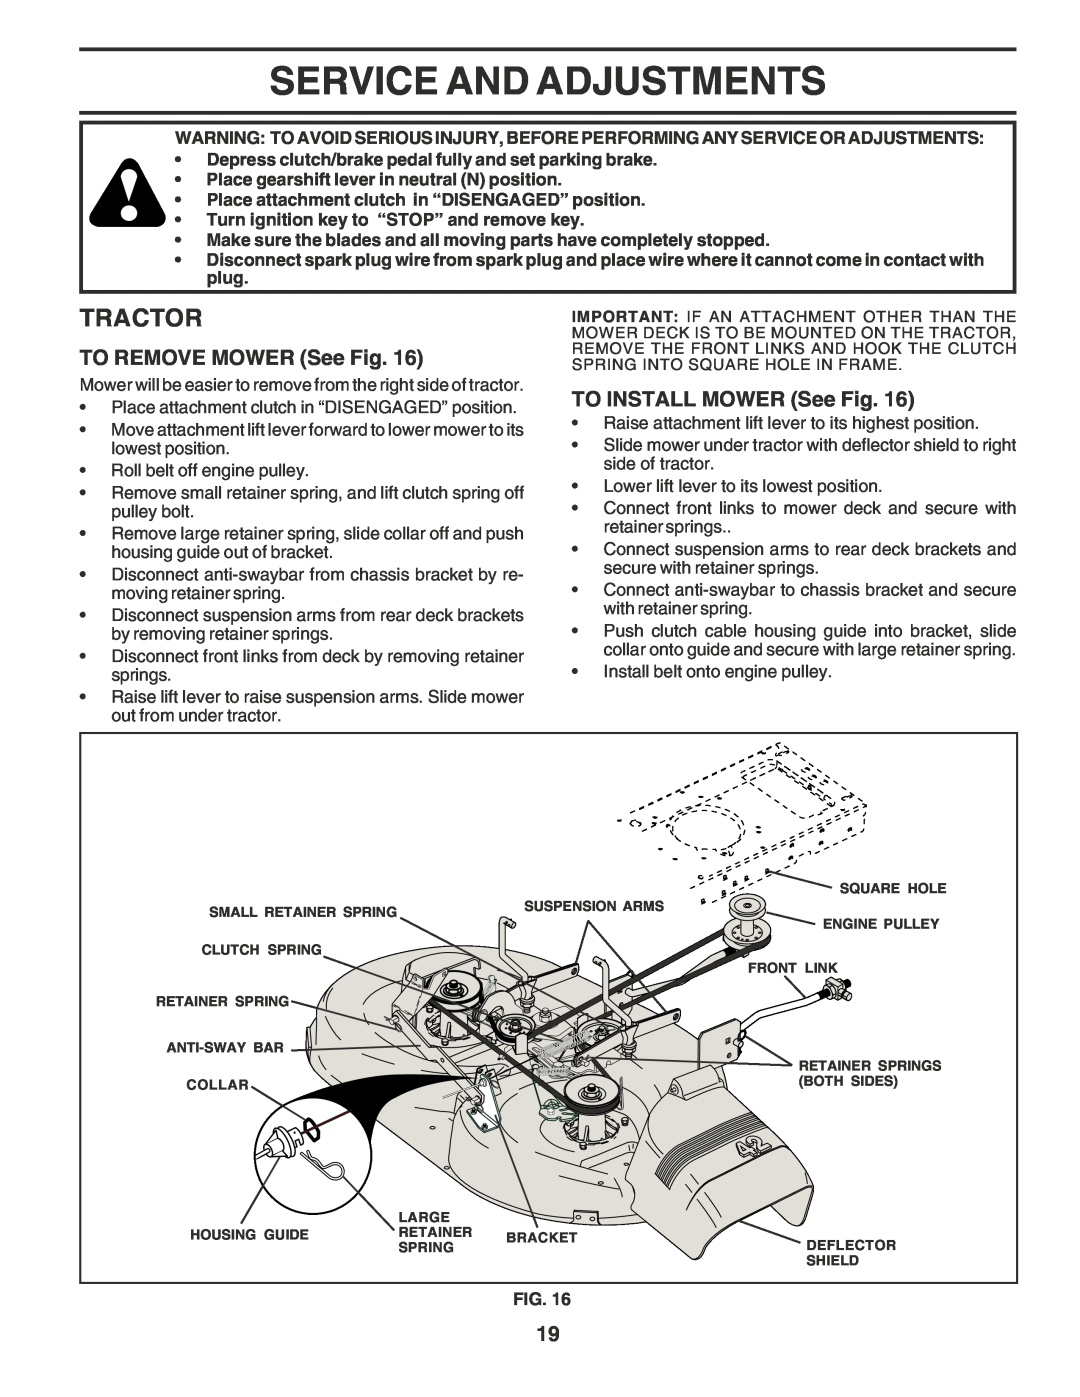 Poulan PPR2042STB owner manual Service And Adjustments, TO REMOVE MOWER See Fig, TO INSTALL MOWER See Fig, Tractor 